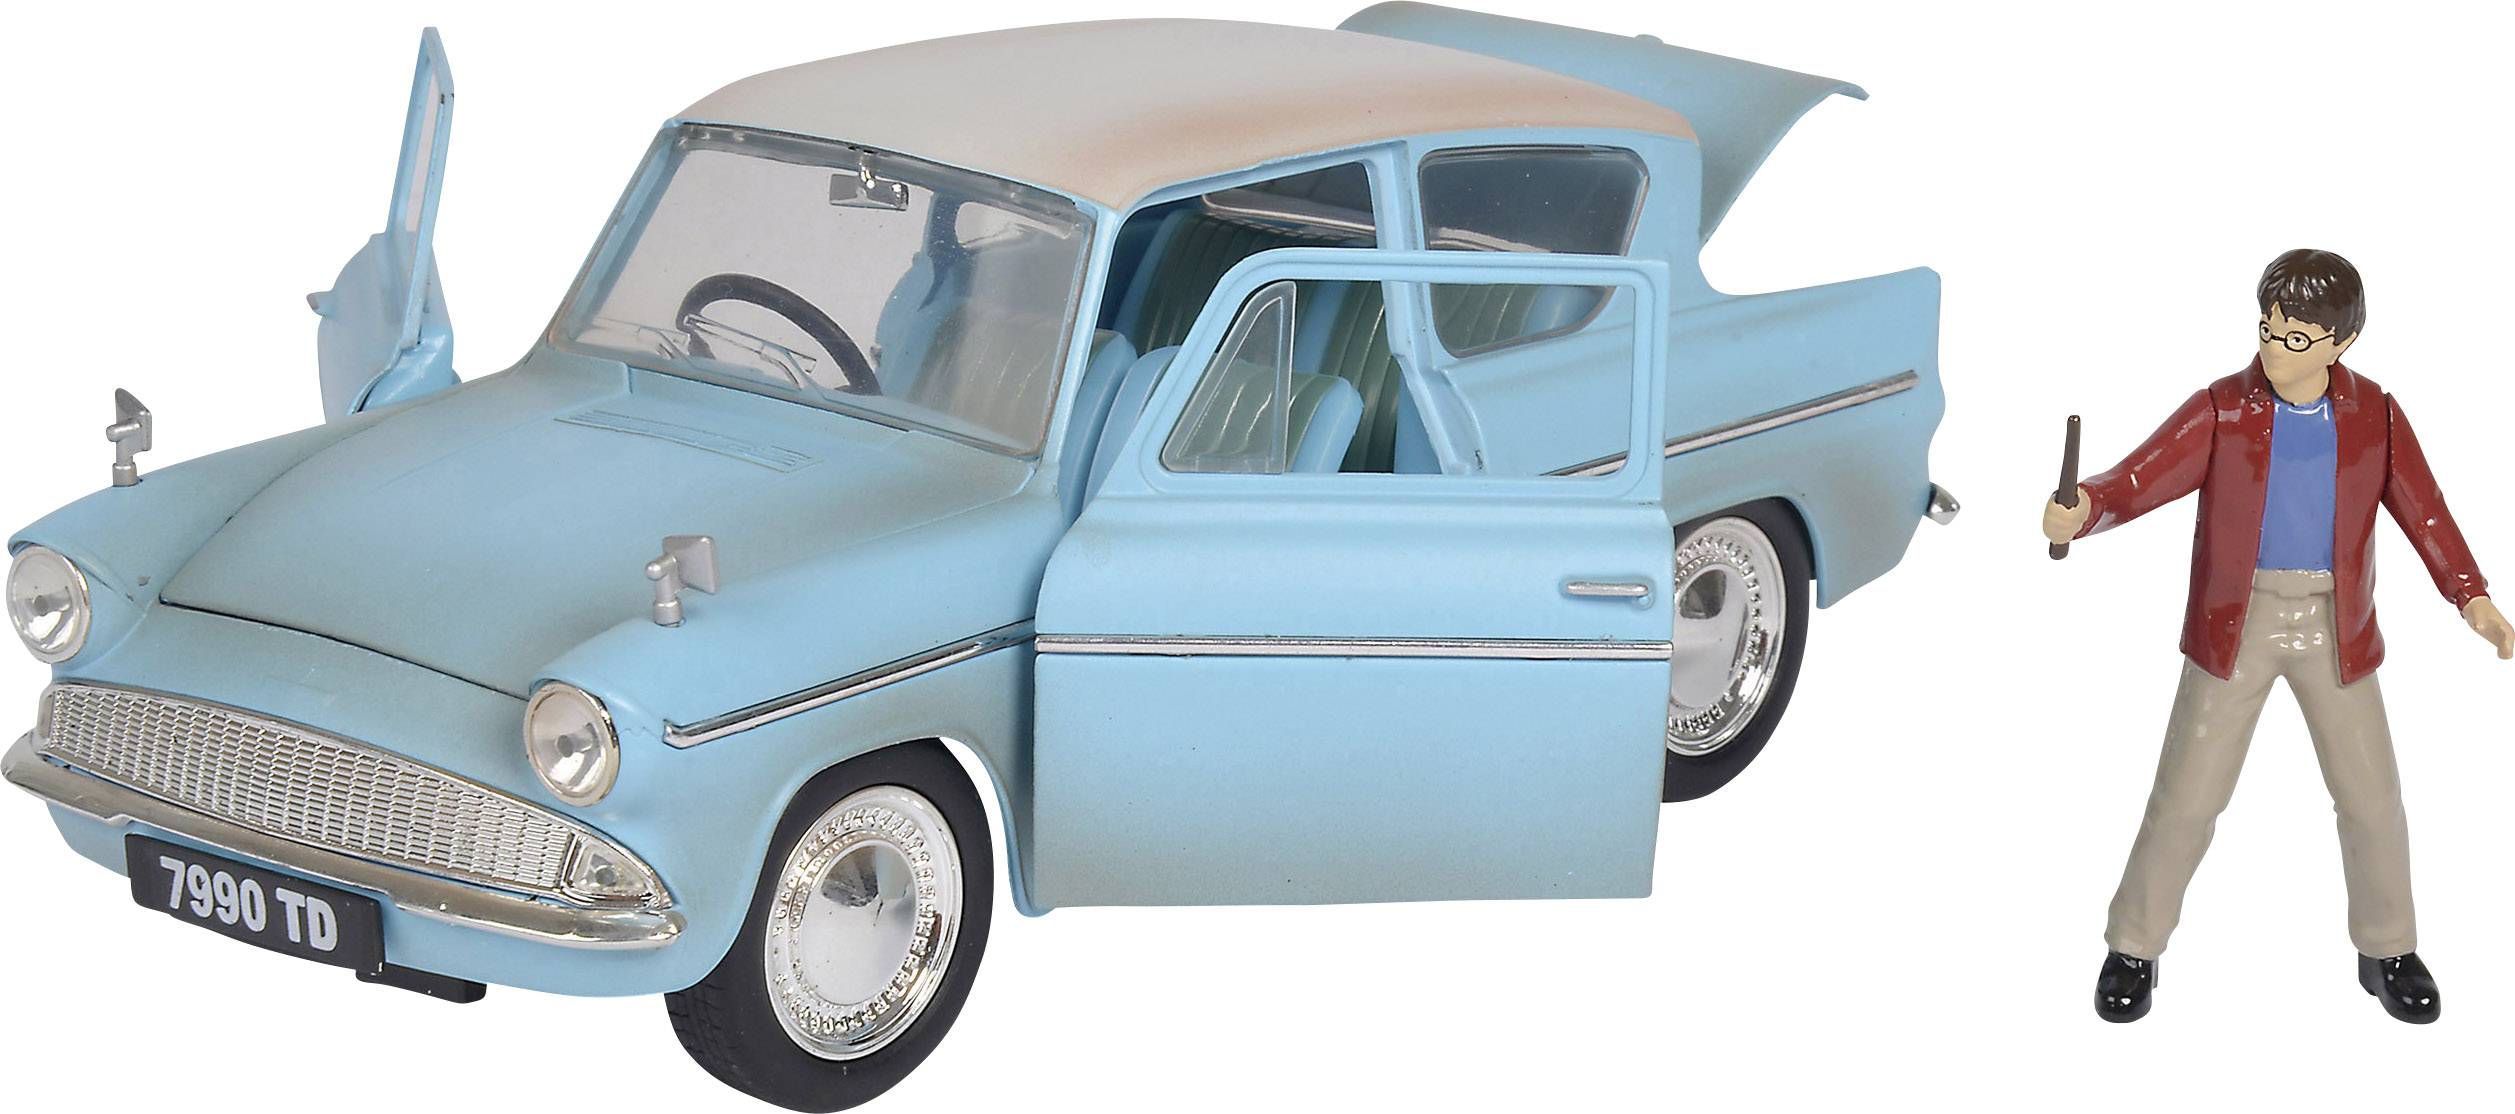 ford anglia toy